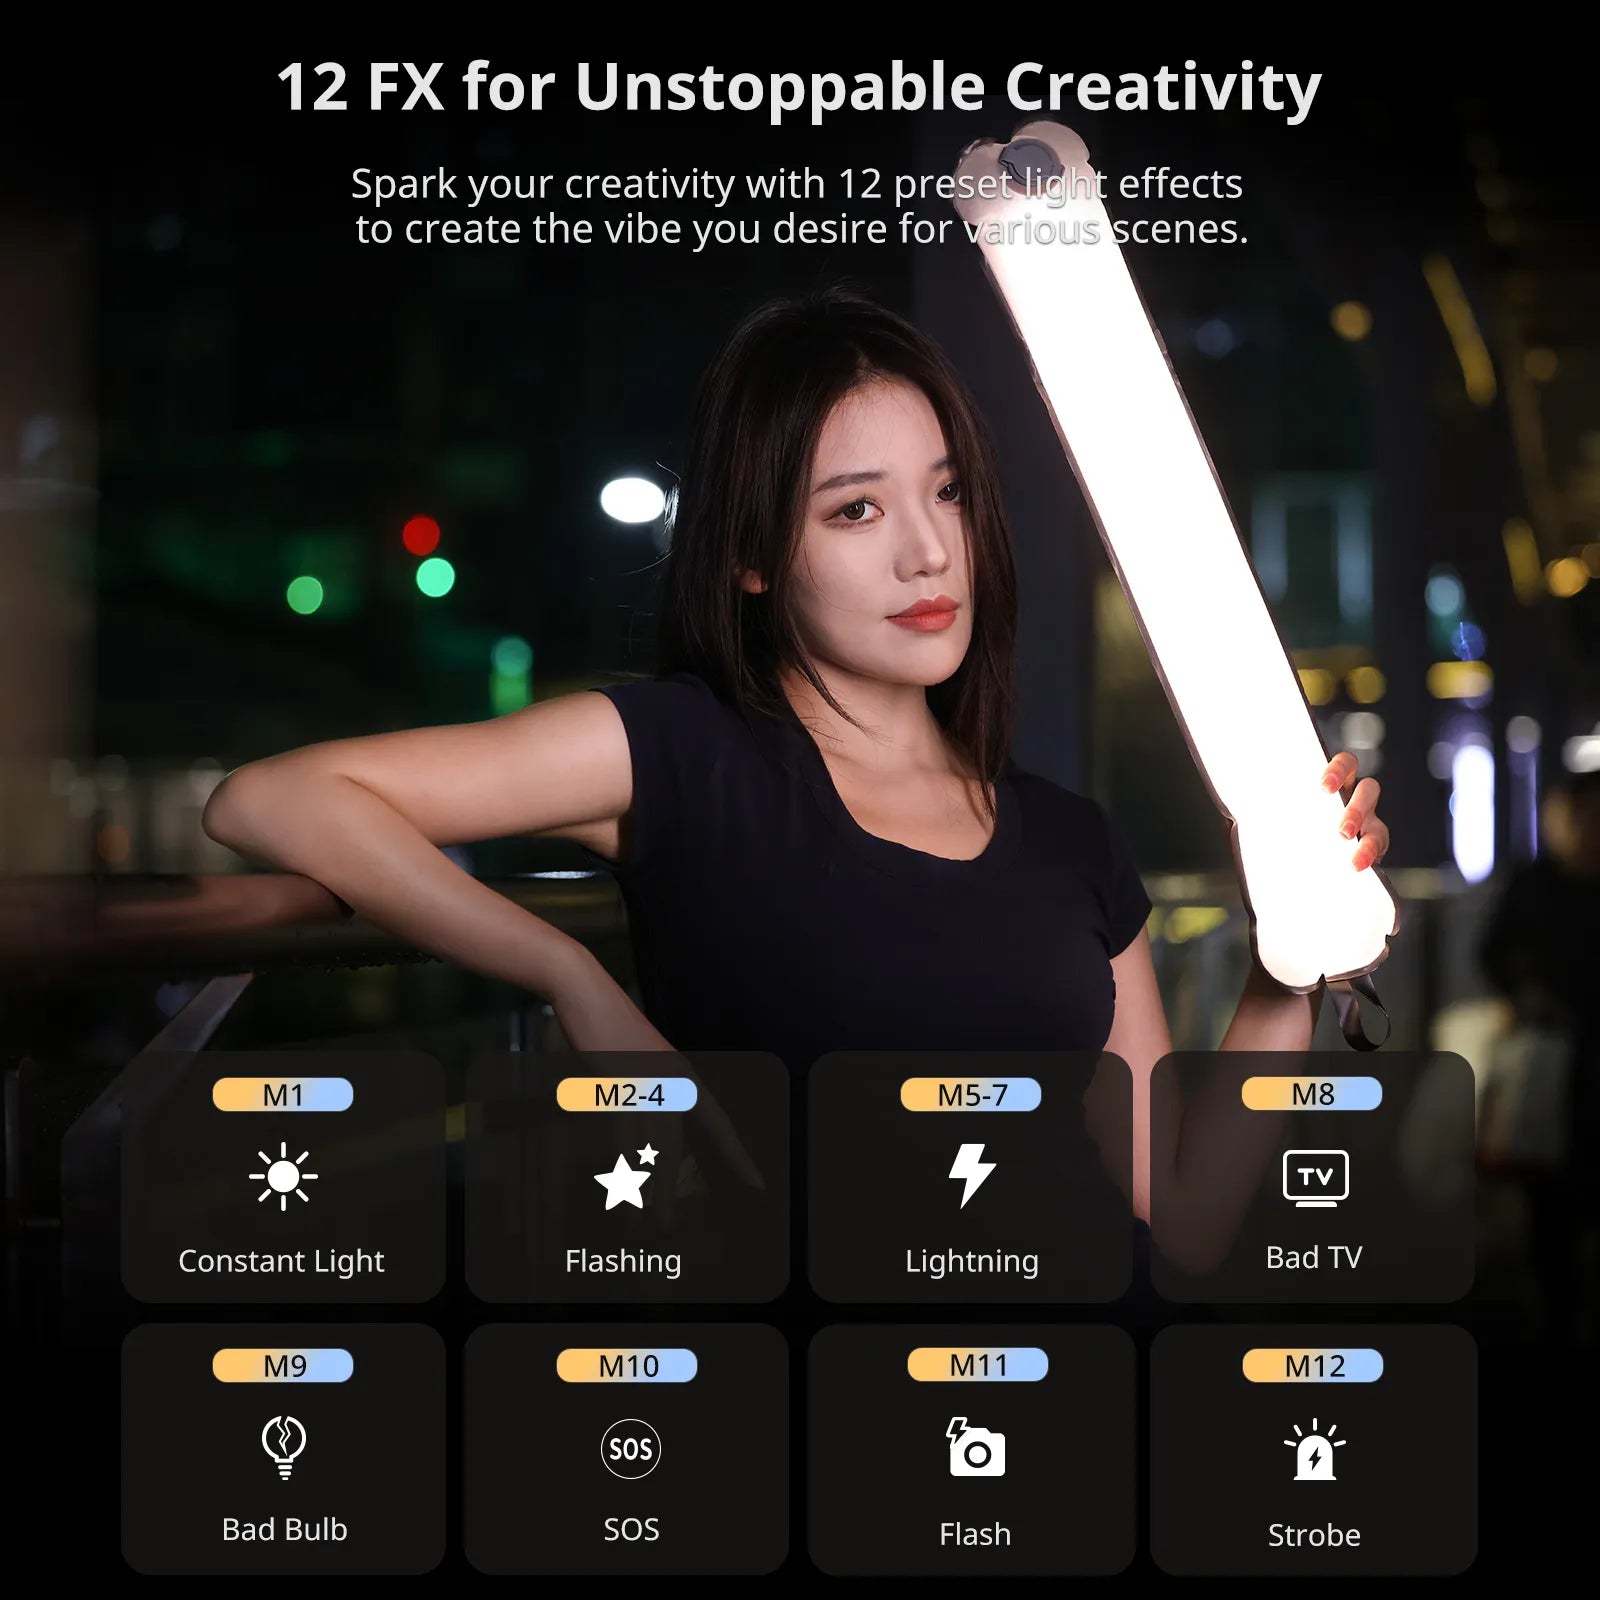 12 FX for Unstoppable Creativity